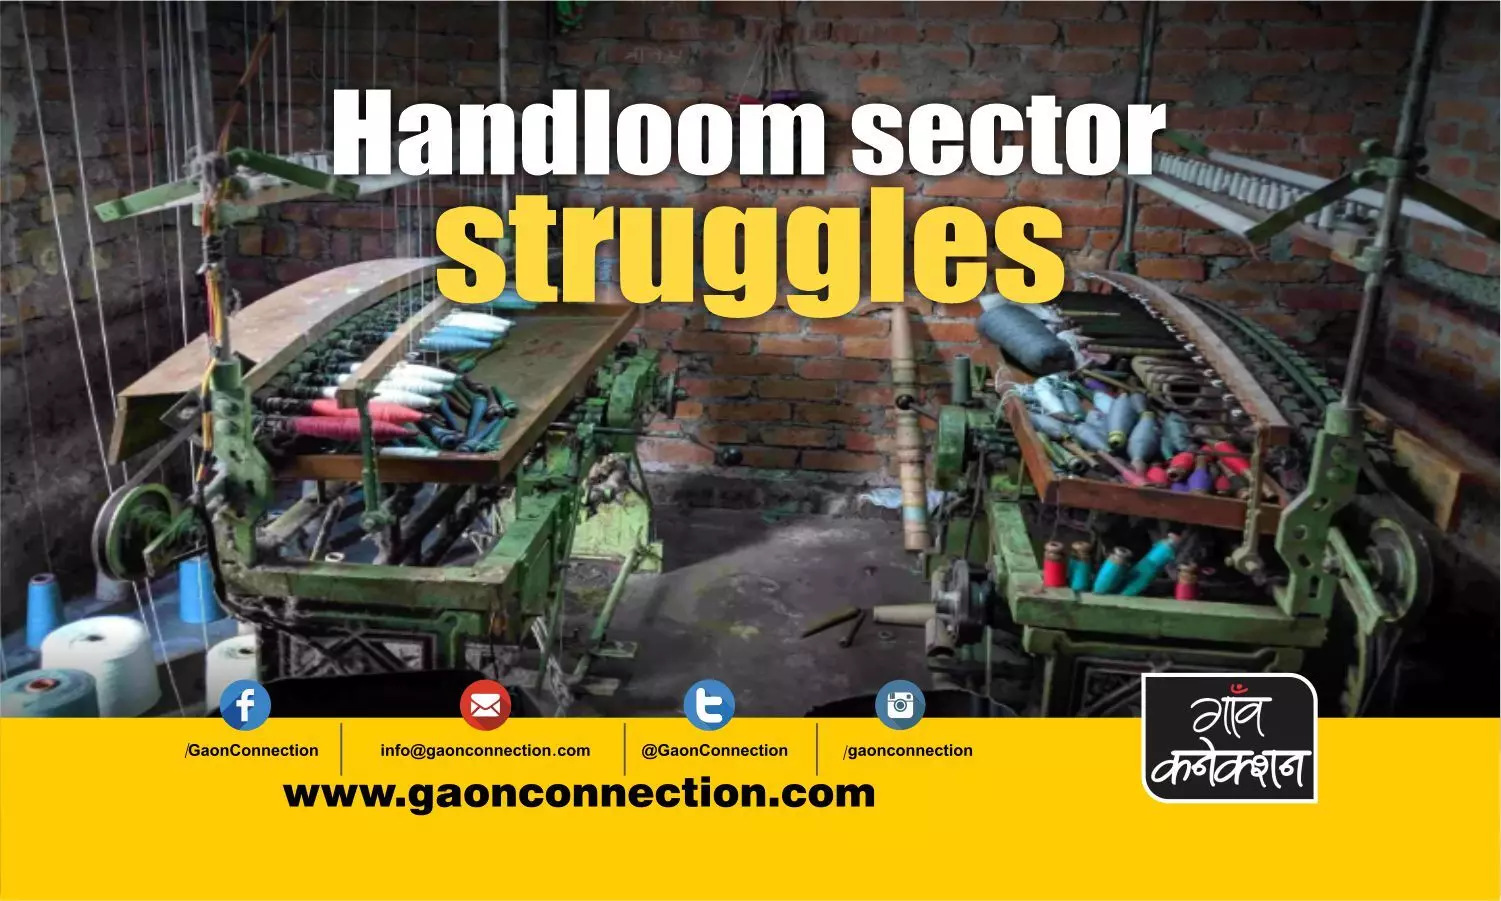 The handloom industry is receiving one blow after the other